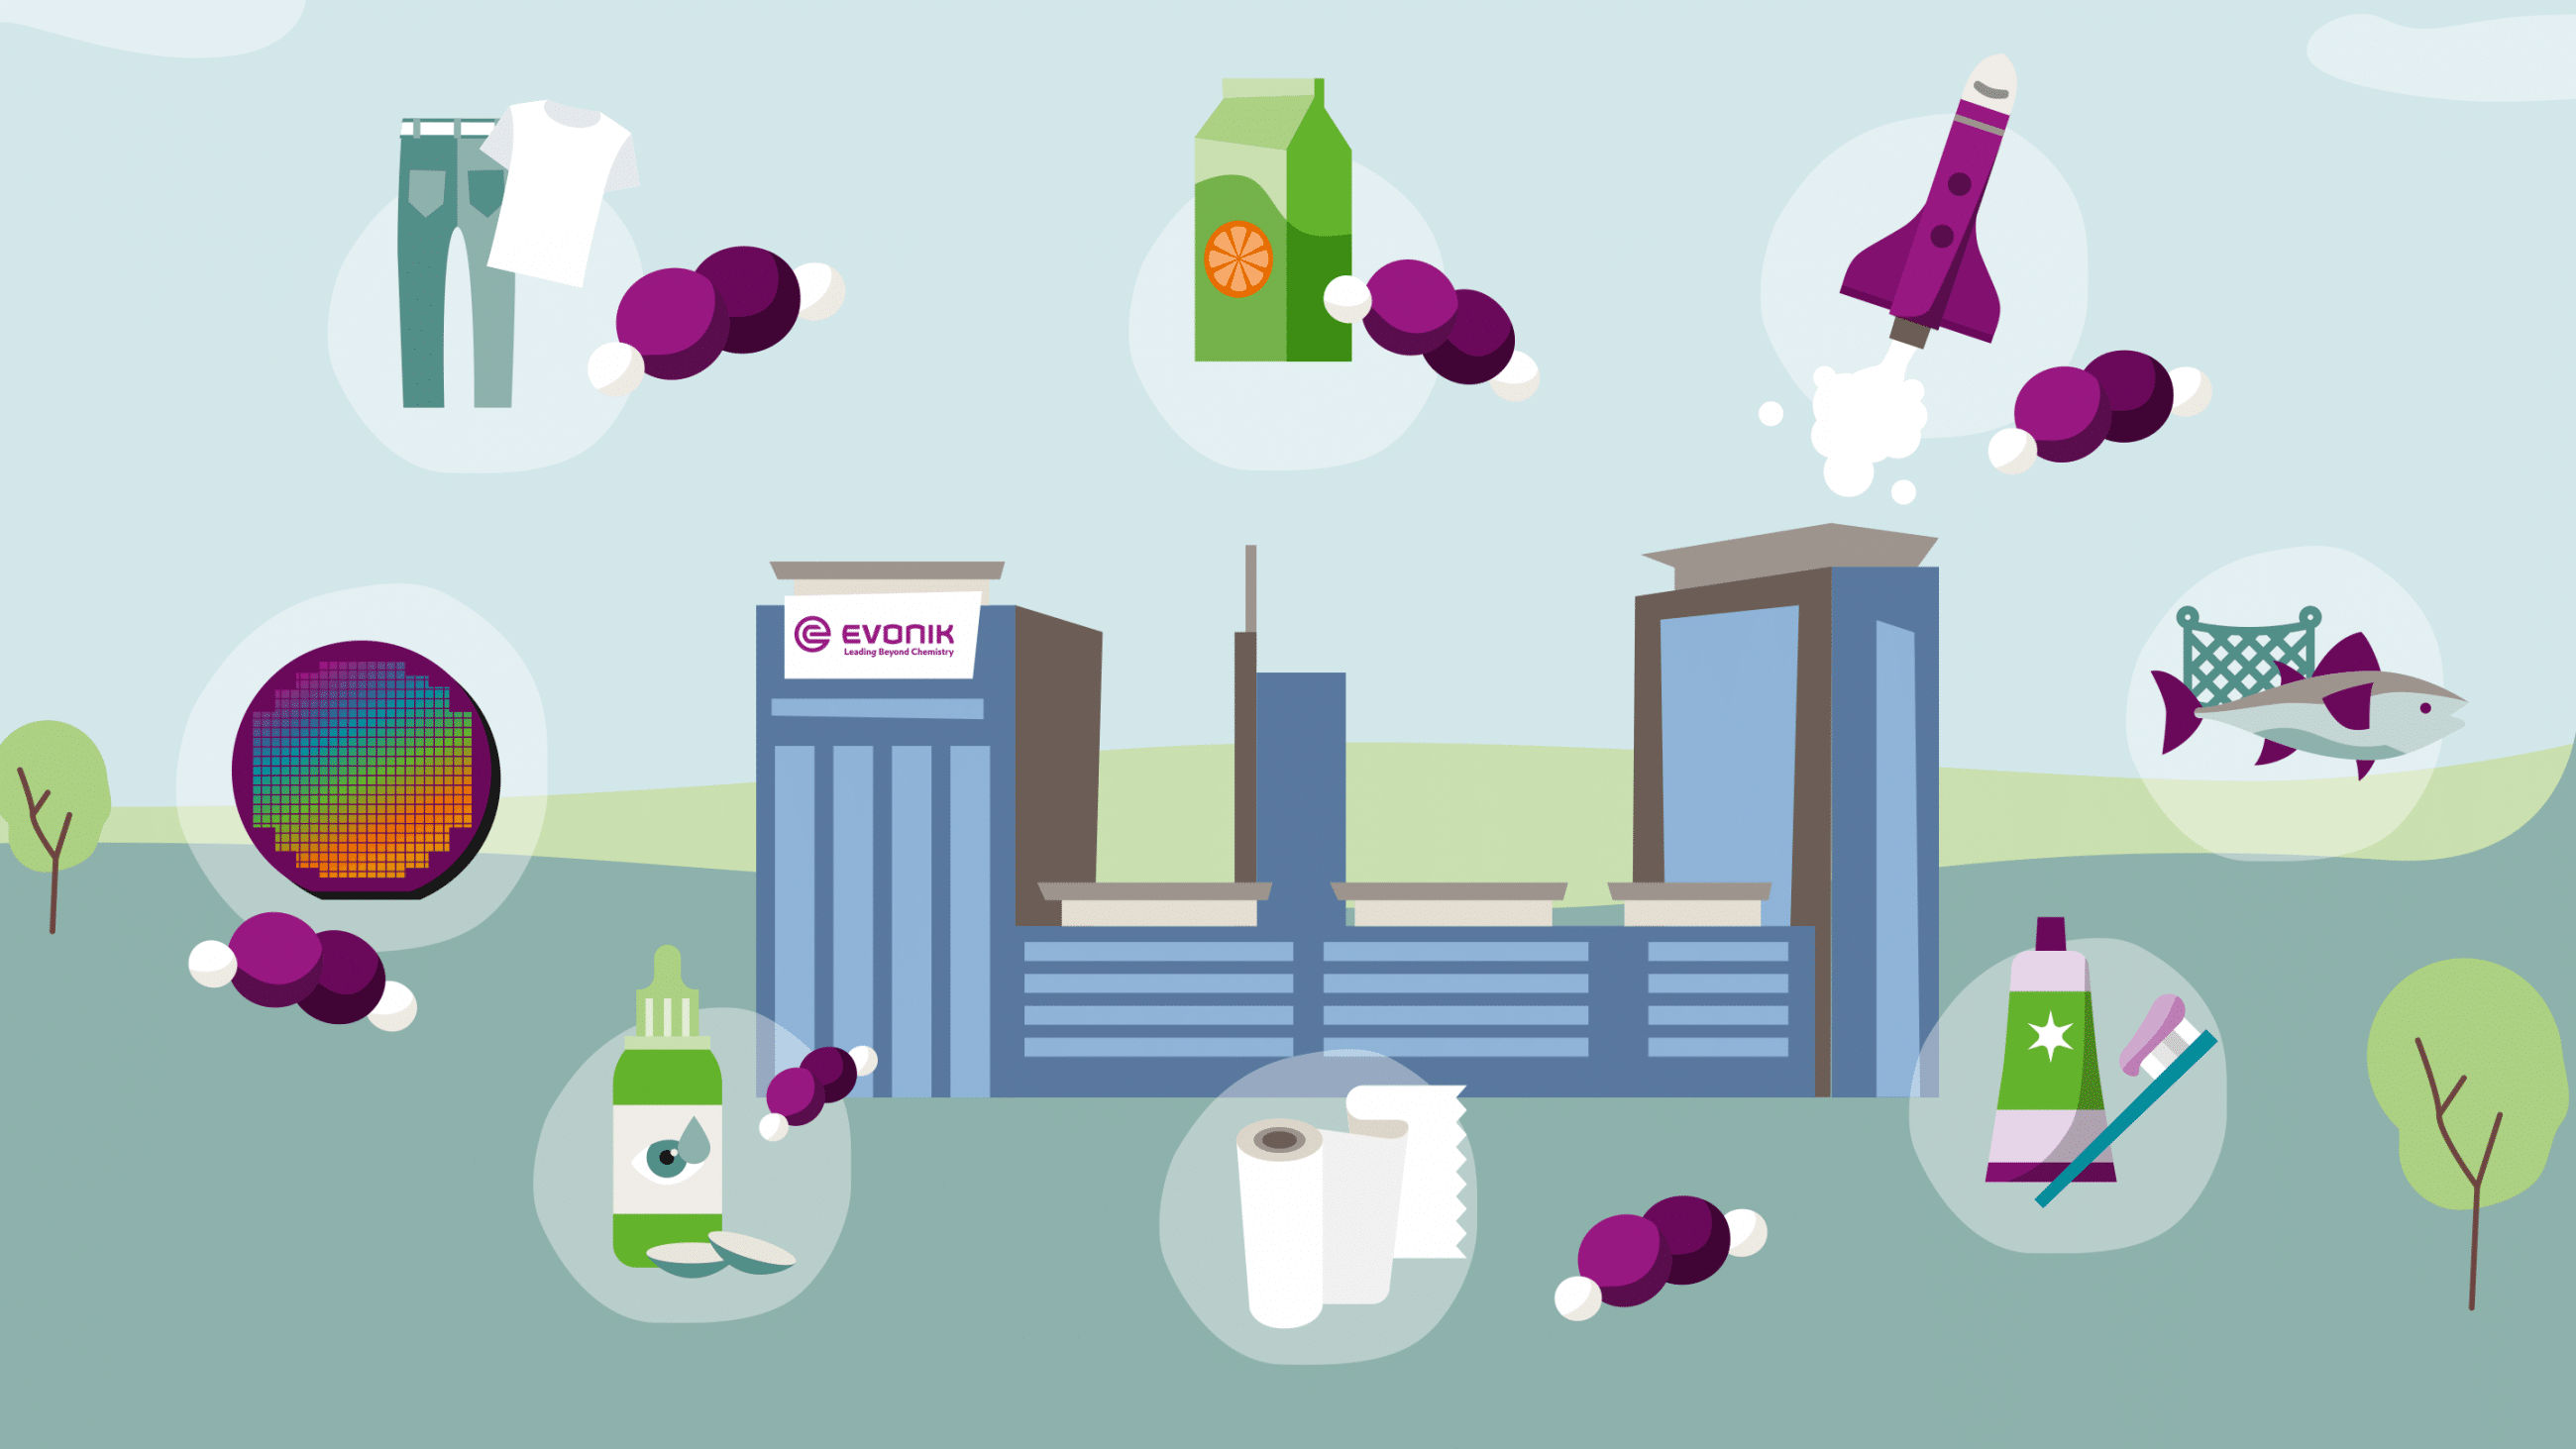 Evonik Active Oxygens produces hydrogen peroxide for a range of applications and industries, from the textile industry to the manufacture of computer chips and the paper industry.